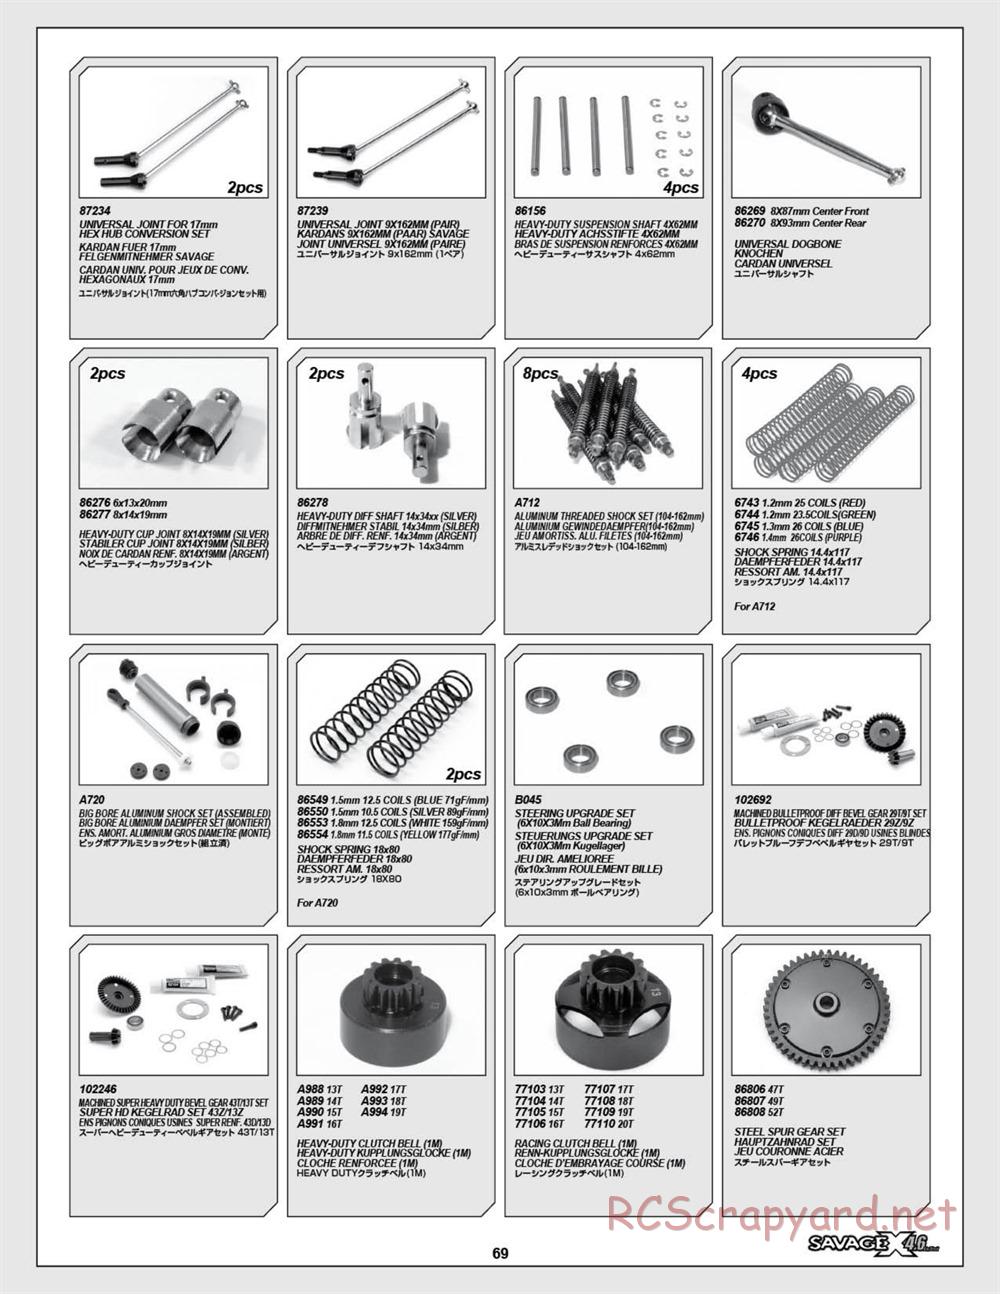 HPI - Savage X 4.6 - Exploded View - Page 69